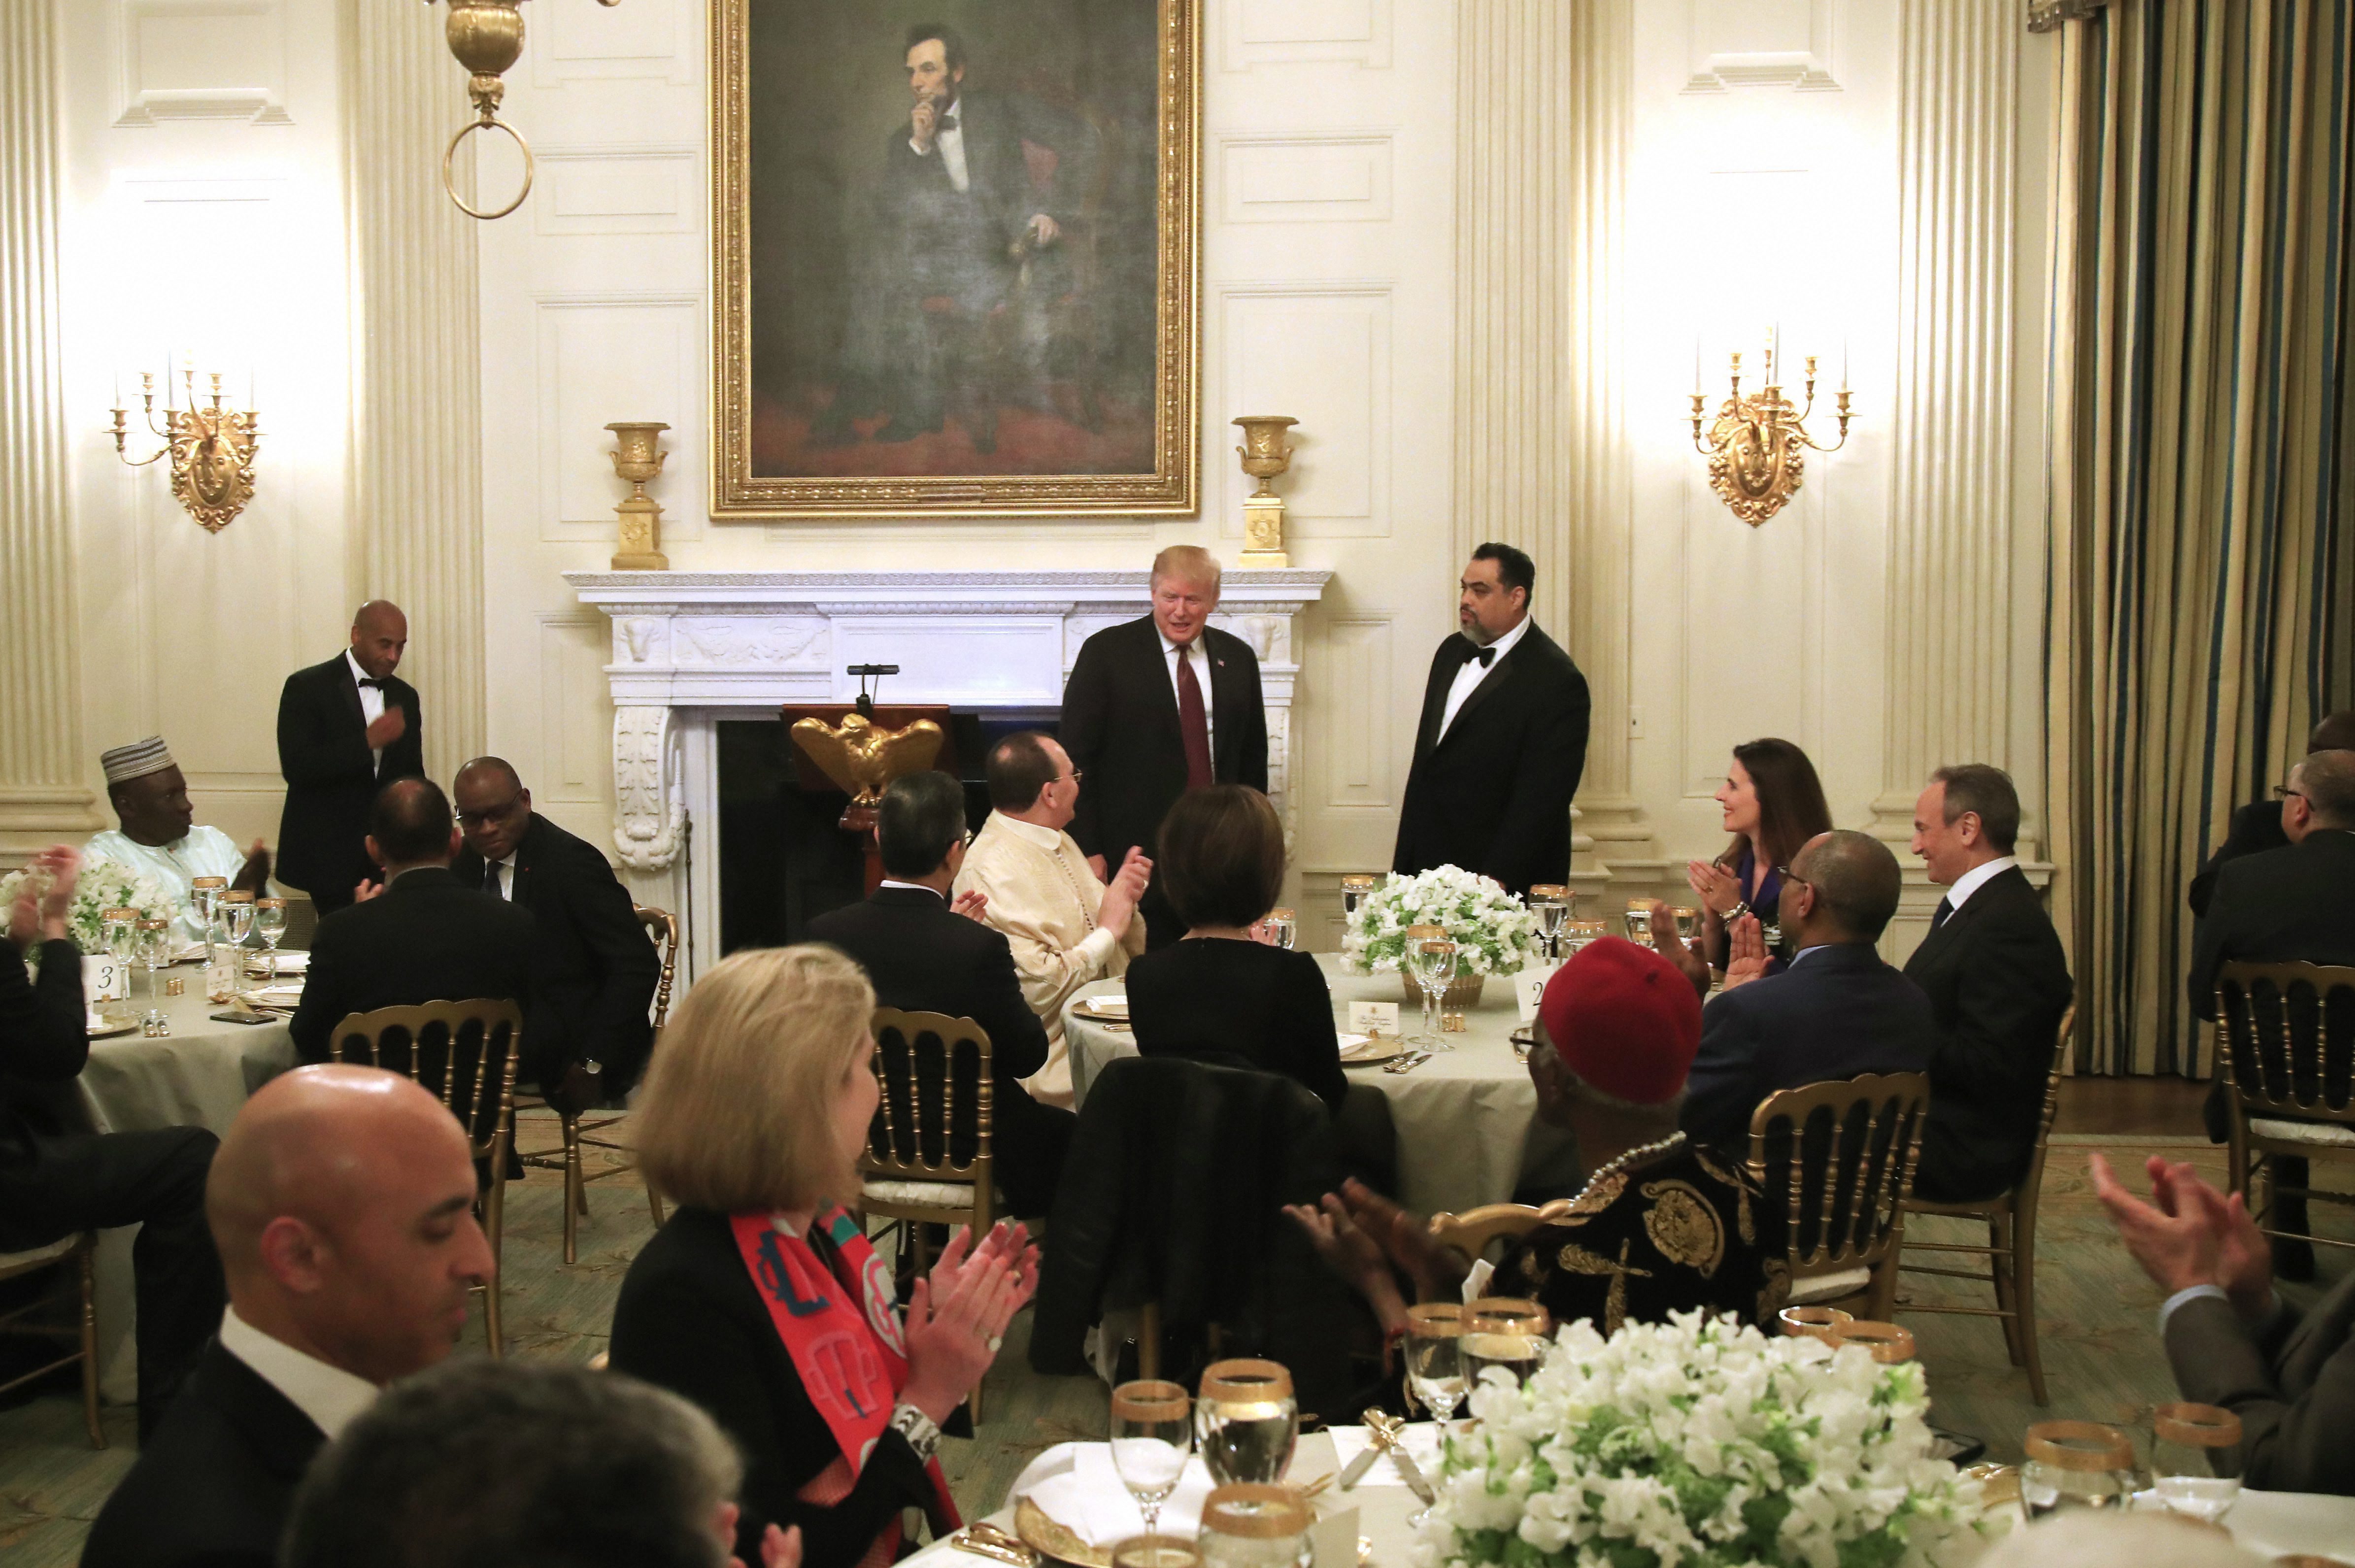 President Donald Trump joins an iftar dinner, which breaks a daylong fast, celebrating Islam's holy month of Ramadan, in the State Dining Room of the White House in Washington - PTI